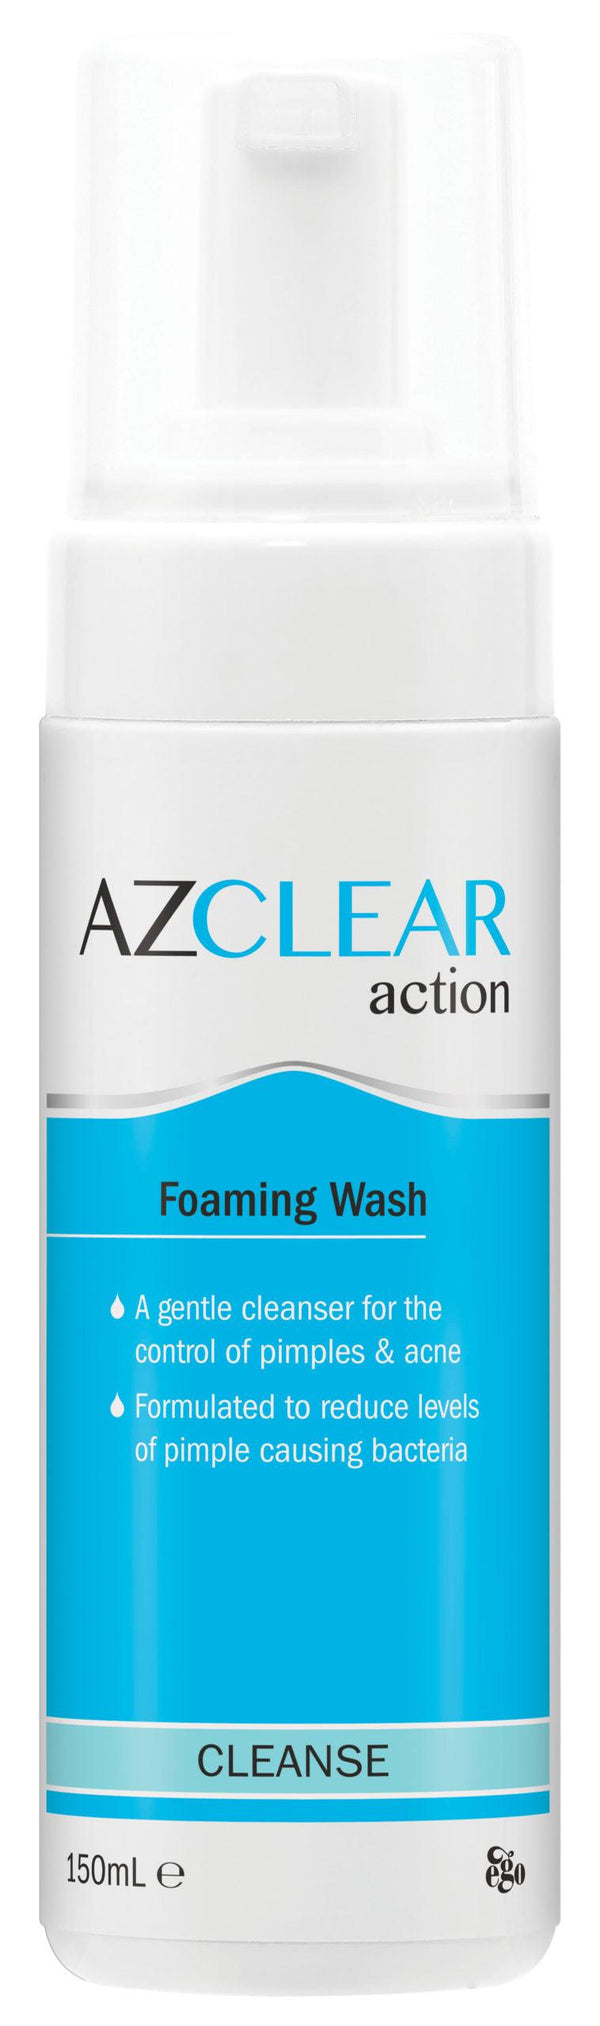 Azclear Action Foaming Wash 150ml - Aussie Pharmacy